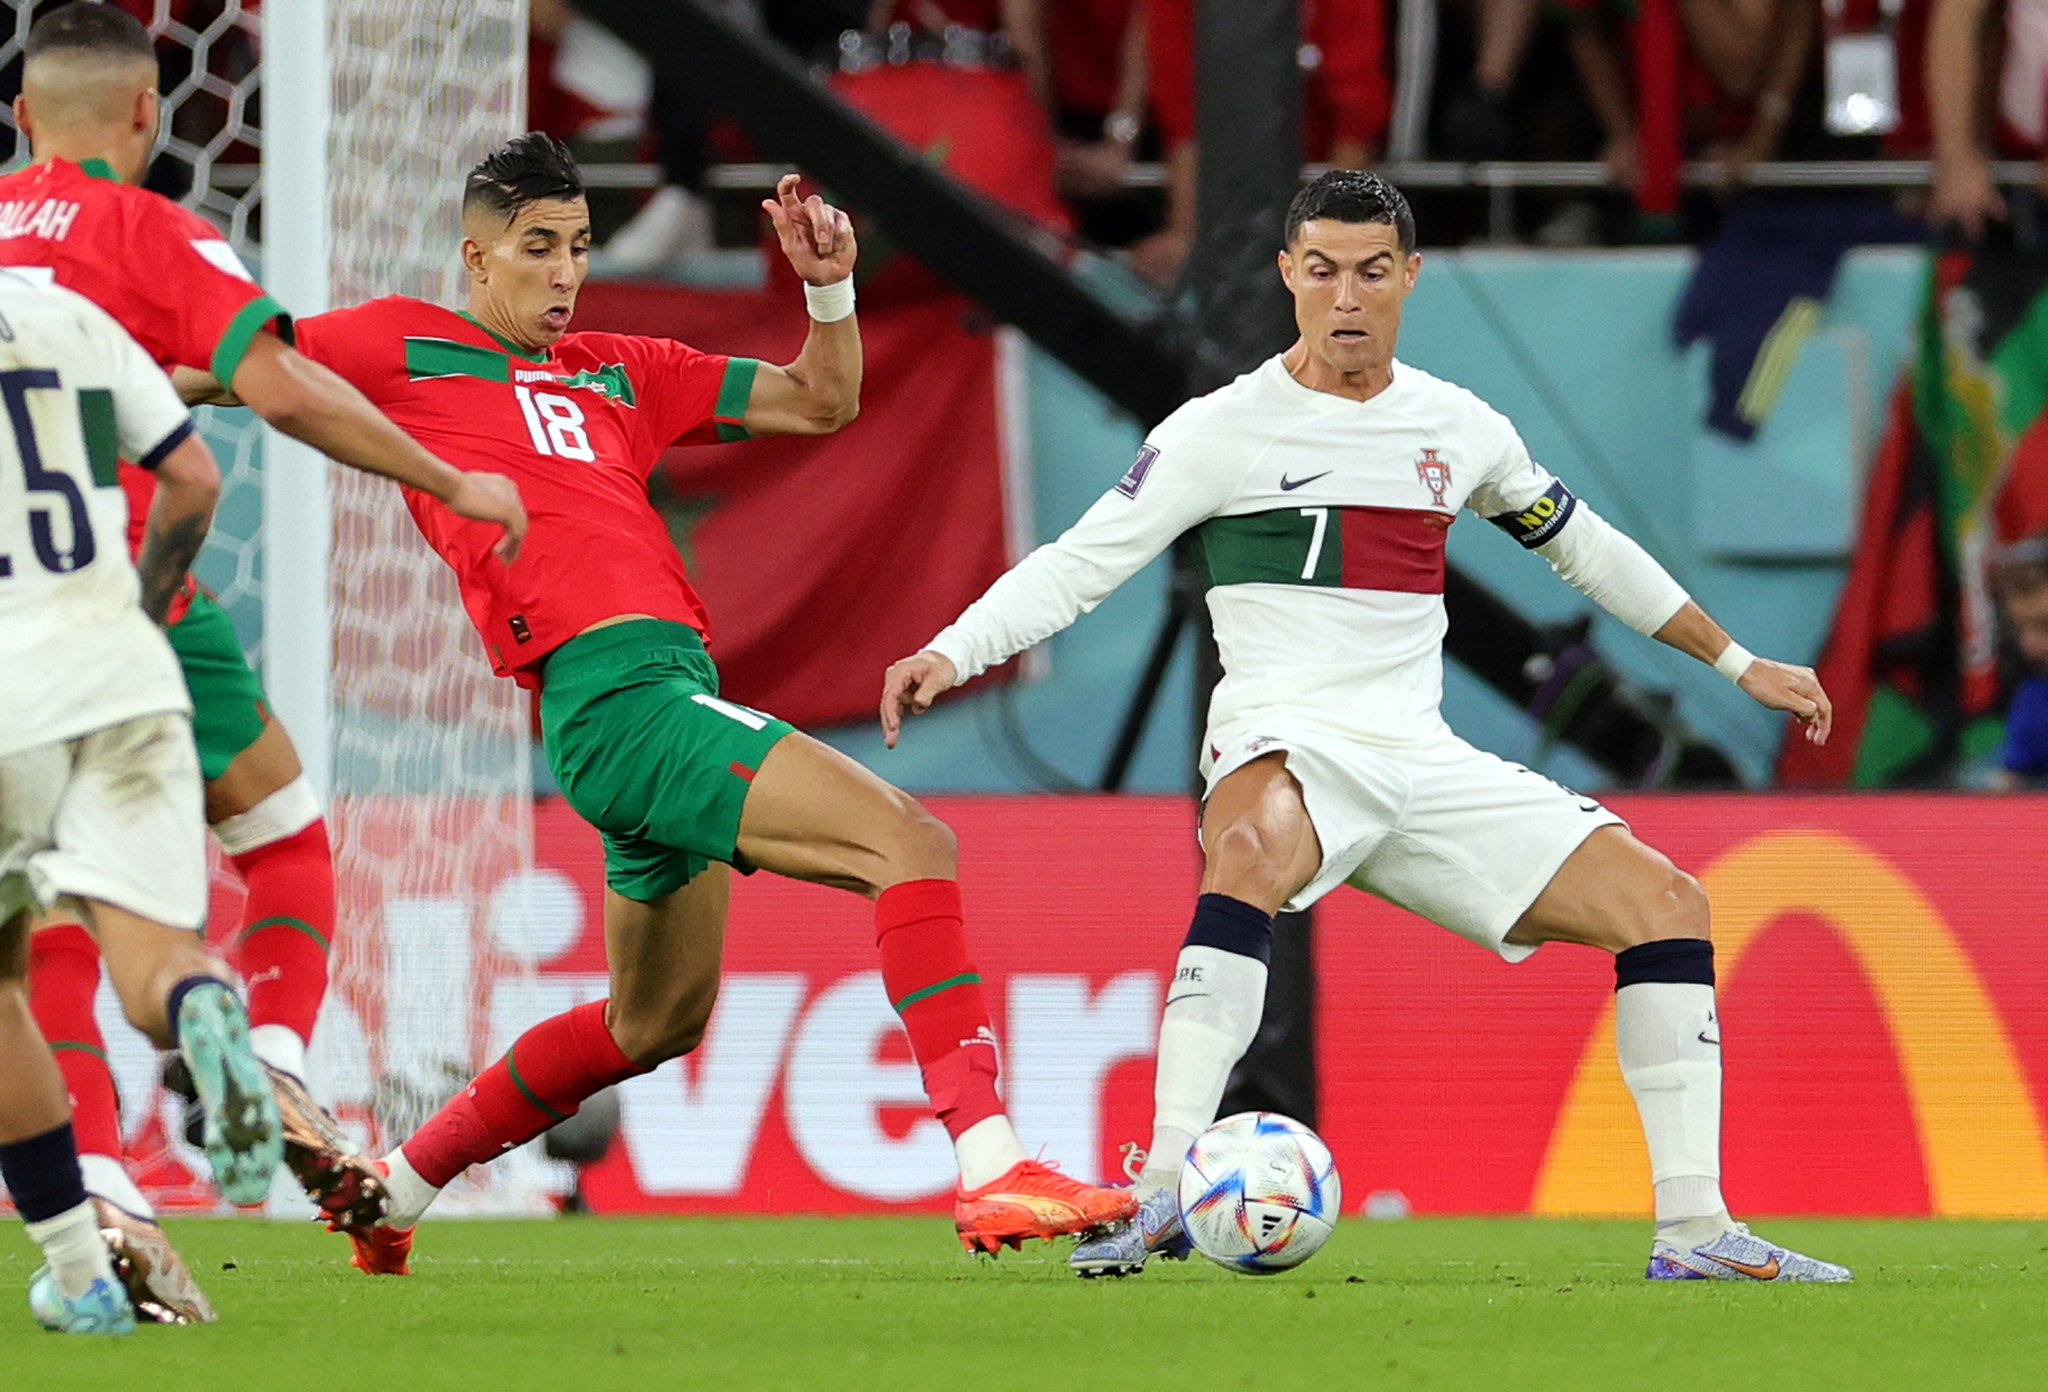 Doha (Qatar), 10/12/2022.- Jawad El Yamiq of Morocco (L) in action against Cristiano Ronaldo of  lt;HIT gt;Portugal lt;/HIT gt; during the FIFA World Cup 2022 quarter final soccer match between Morocco and  lt;HIT gt;Portugal lt;/HIT gt; at Al Thumama Stadium in Doha, Qatar, 10 December 2022. (Mundial de Fútbol, Marruecos, Catar) EFE/EPA/Friedemann Vogel